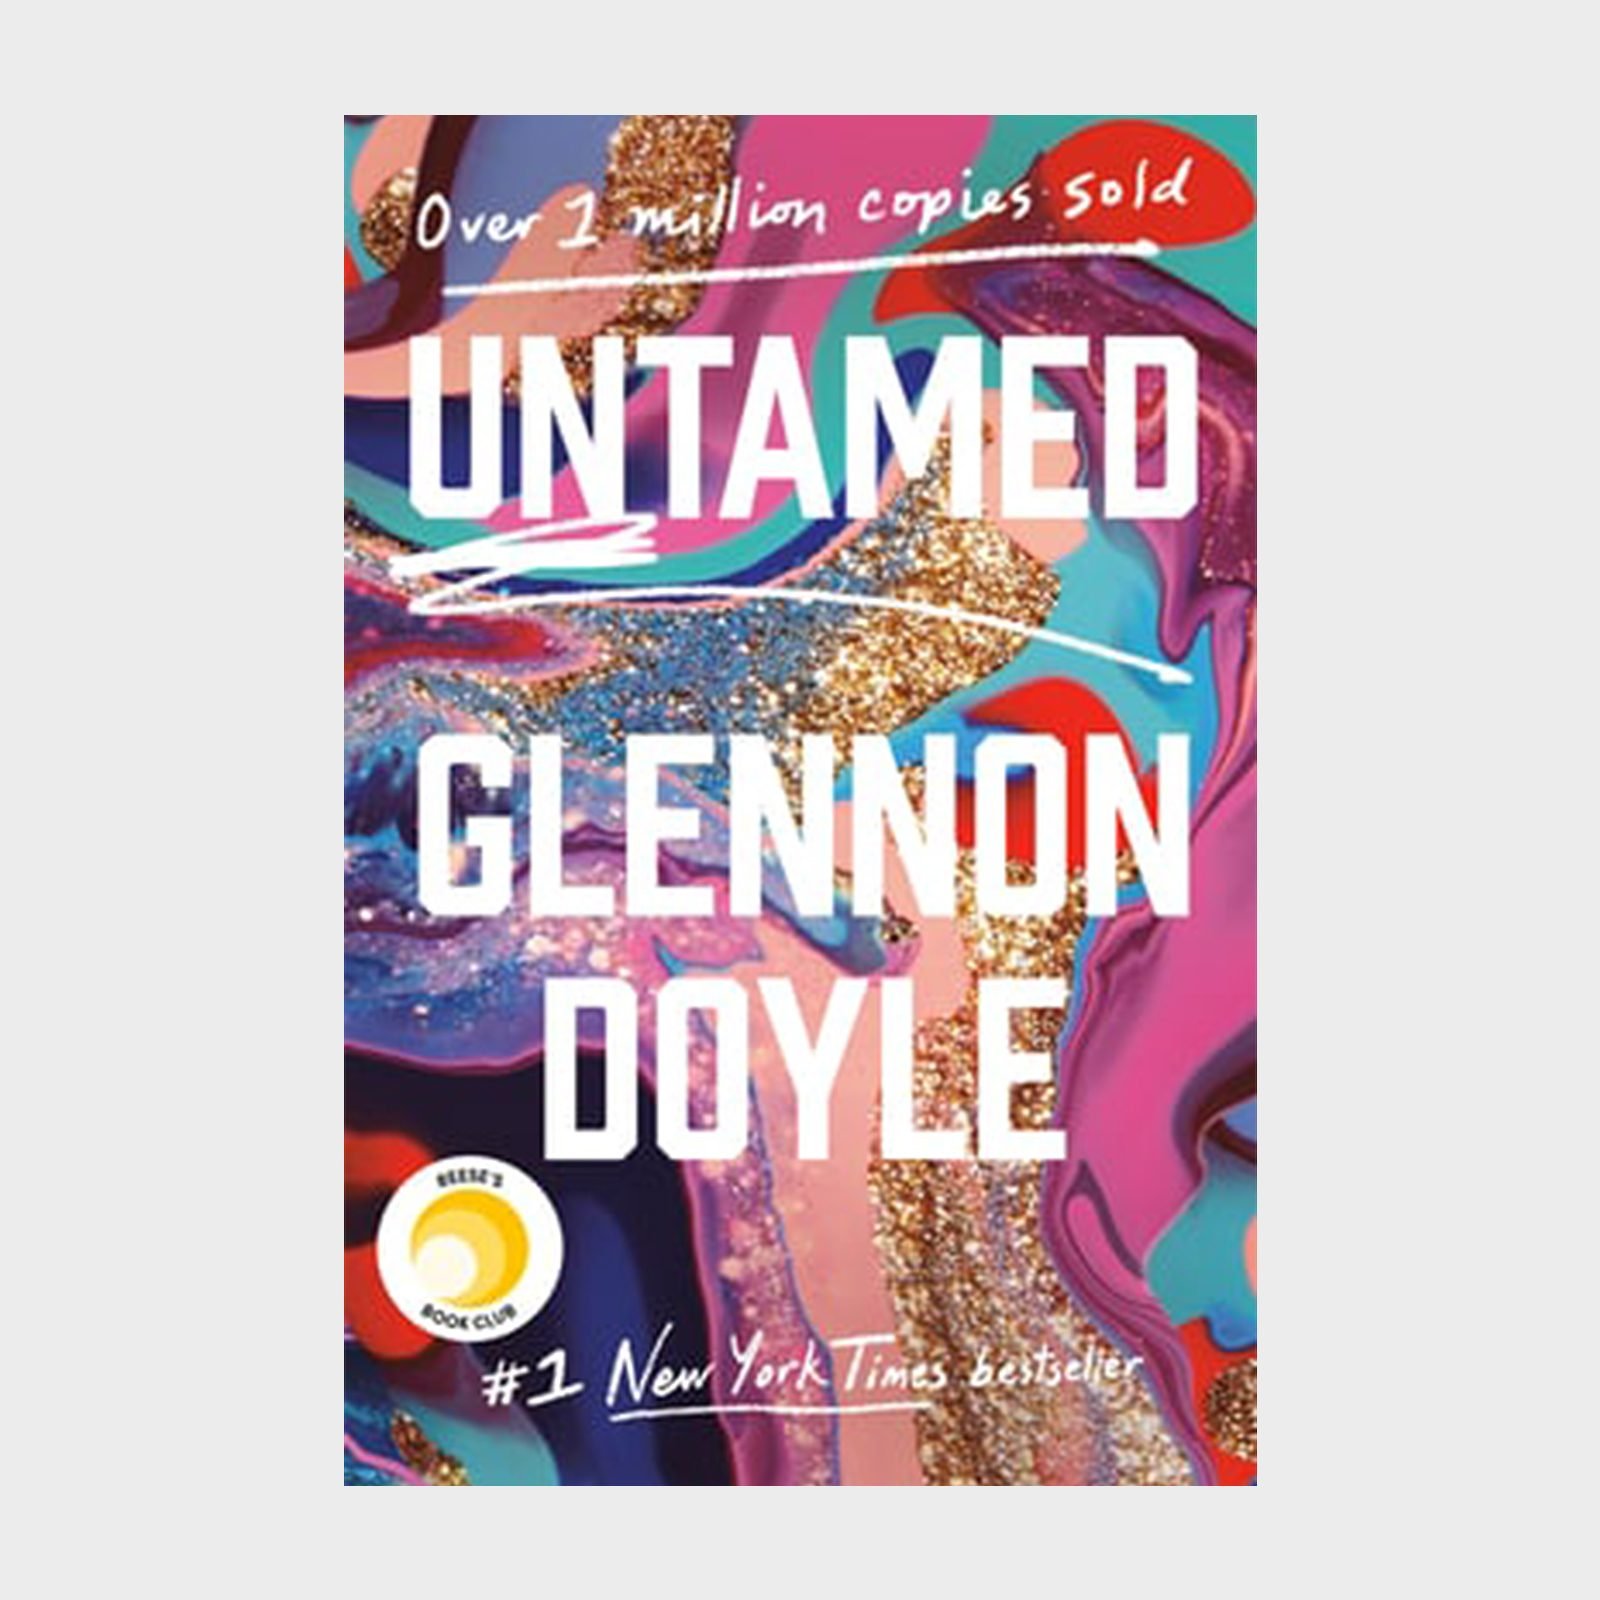 <p>Some readers want lessons and accompaniment on their journeys but can't stand self-help books. For those people, a personal narrative that includes applicable wisdom is far more helpful than a traditional self-help book. Glennon Doyle's 2020 best seller, <em>Untamed</em>, and the next two books on our list do just that. Doyle studs her life story with quotable insight like "When a woman finally learns that pleasing the world is impossible, she becomes free to learn how to please herself" and her mantra, "We can do hard things." For more stories by authors in their own words, check out our list of the <a href="https://www.rd.com/list/best-autobiographies/">best autobiographies</a> of all time.</p> <p class="listicle-page__cta-button-shop"><a class="shop-btn" href="https://bookshop.org/books/untamed-9781984801258/9781984801258">Shop Now</a></p>